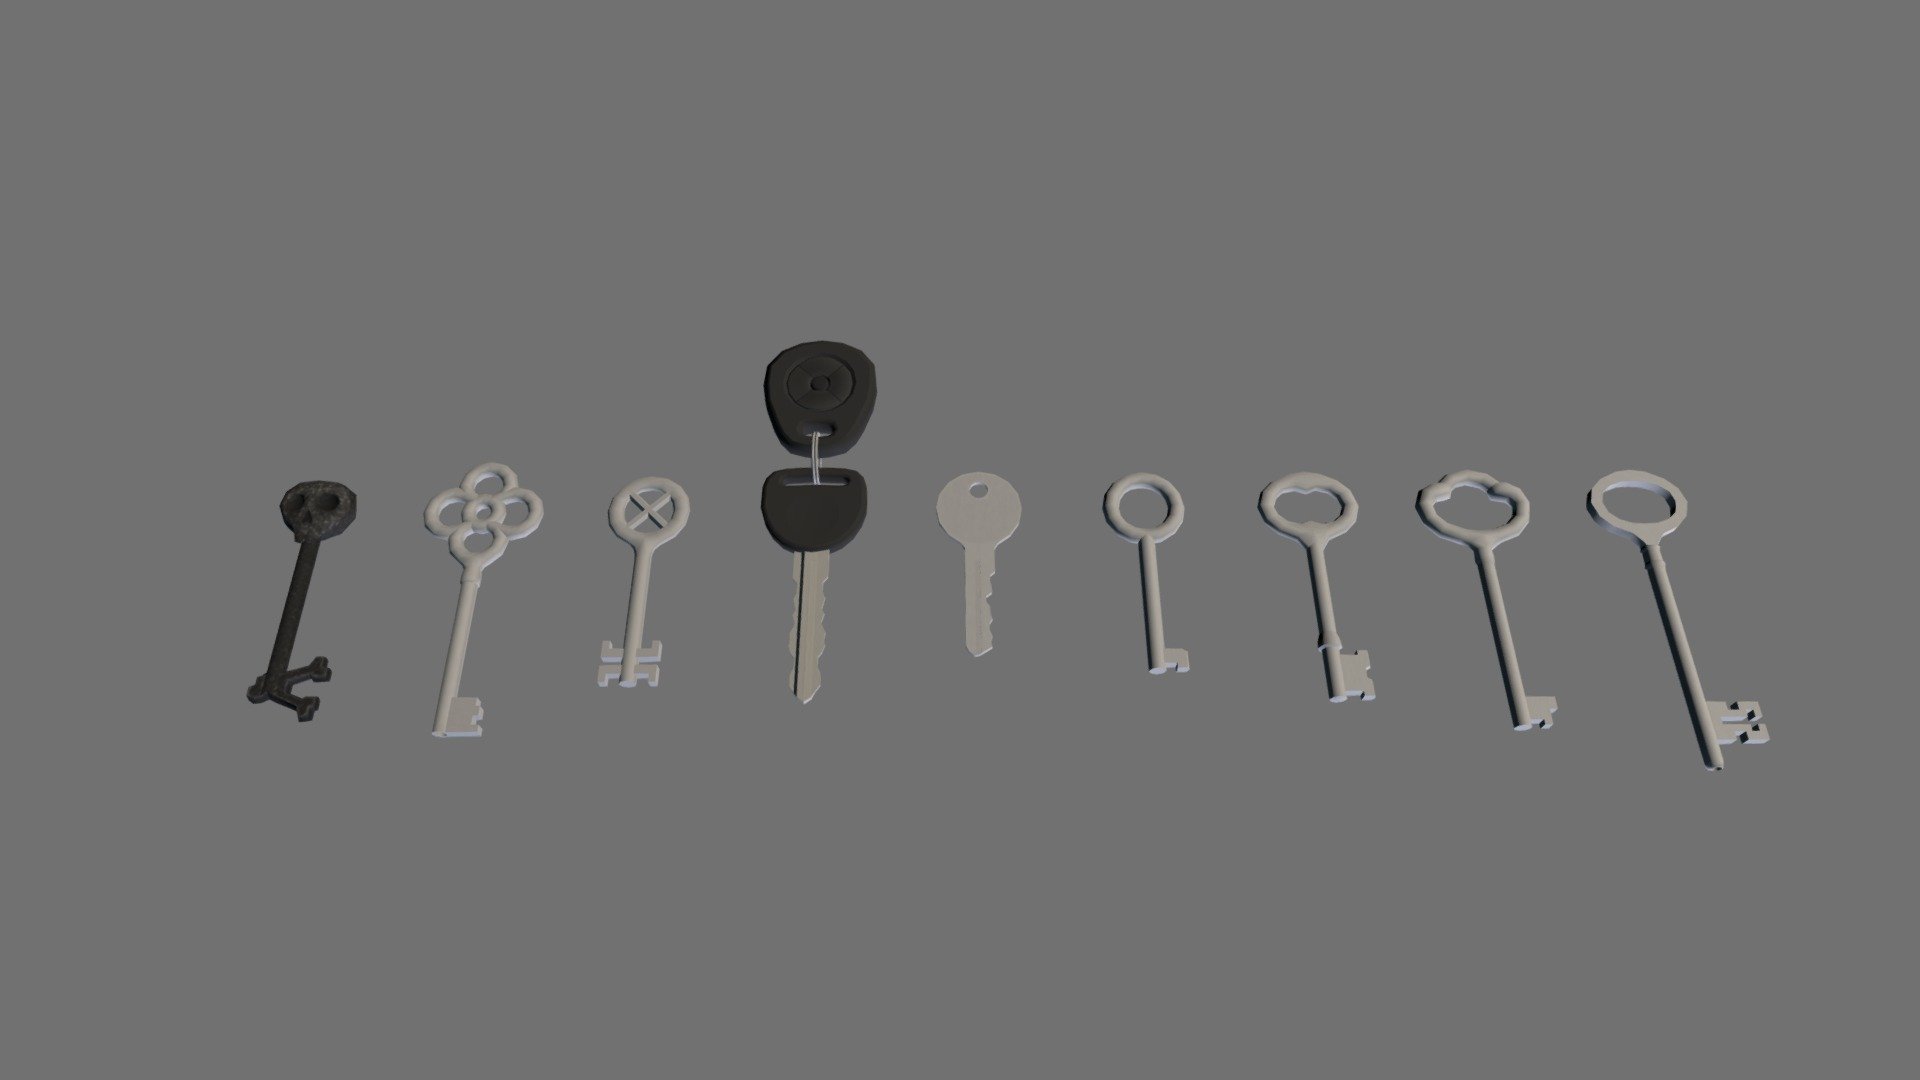 Almost every adventure game I have played involves finding keys to unlock the next area or special room. Here's 9 unique keys to help you.

Key name and triangle count
 Skull 446
Clover 924
X 516
Car with Fab 1522
House 376
Simple 354
BottleOpener 456
Crown 420
Church 424

They have been unwrapped and all of them fit one texture plane. Main texture applied. Except for the skull and car key they are all silver. I recommend creating a material in your game engine for Bronze, Silver and Gold 3d model